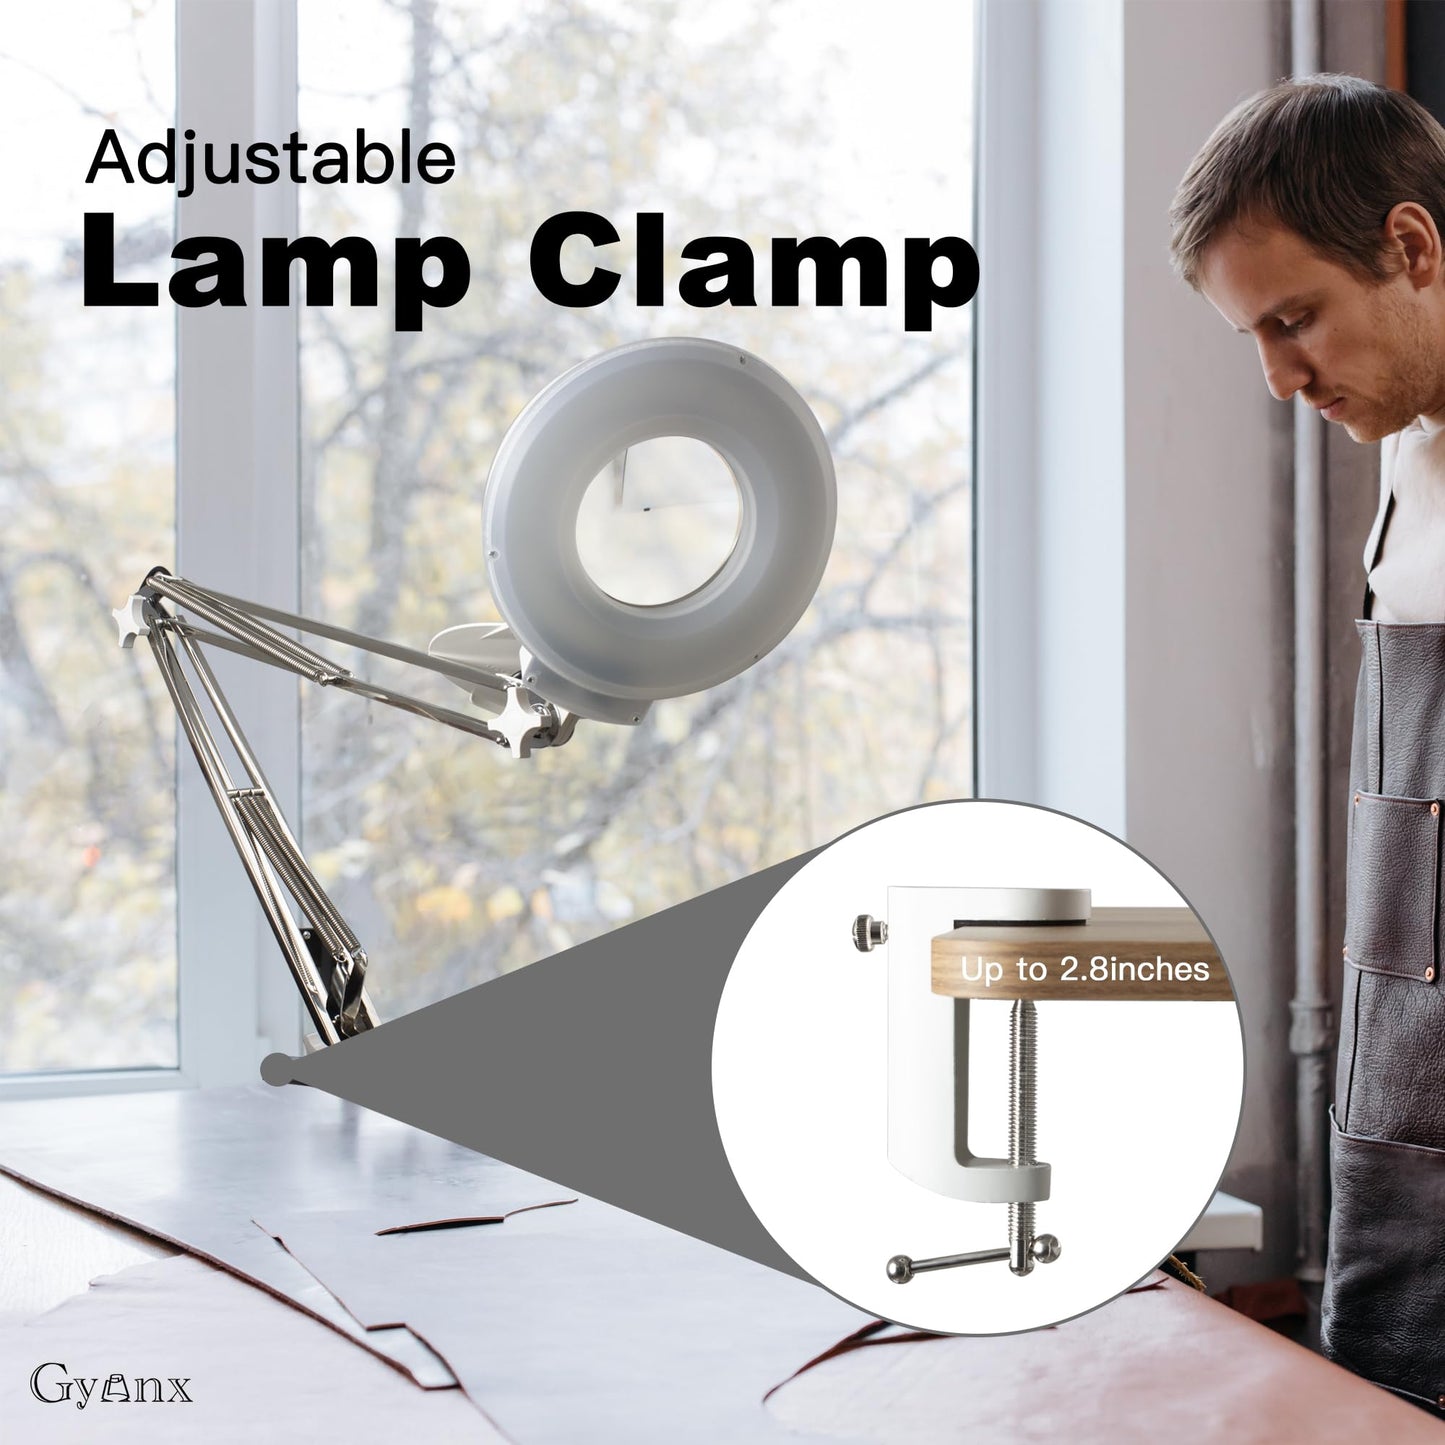 Large Magnifying Lamp with Clamp - Heavy Duty 10X LED Magnifier, 4200 Lumens, 5 Inch Glass Lens - Adjustable Stainless Steel Arm - Perfect for Reading, Craft, Knitting, and etc